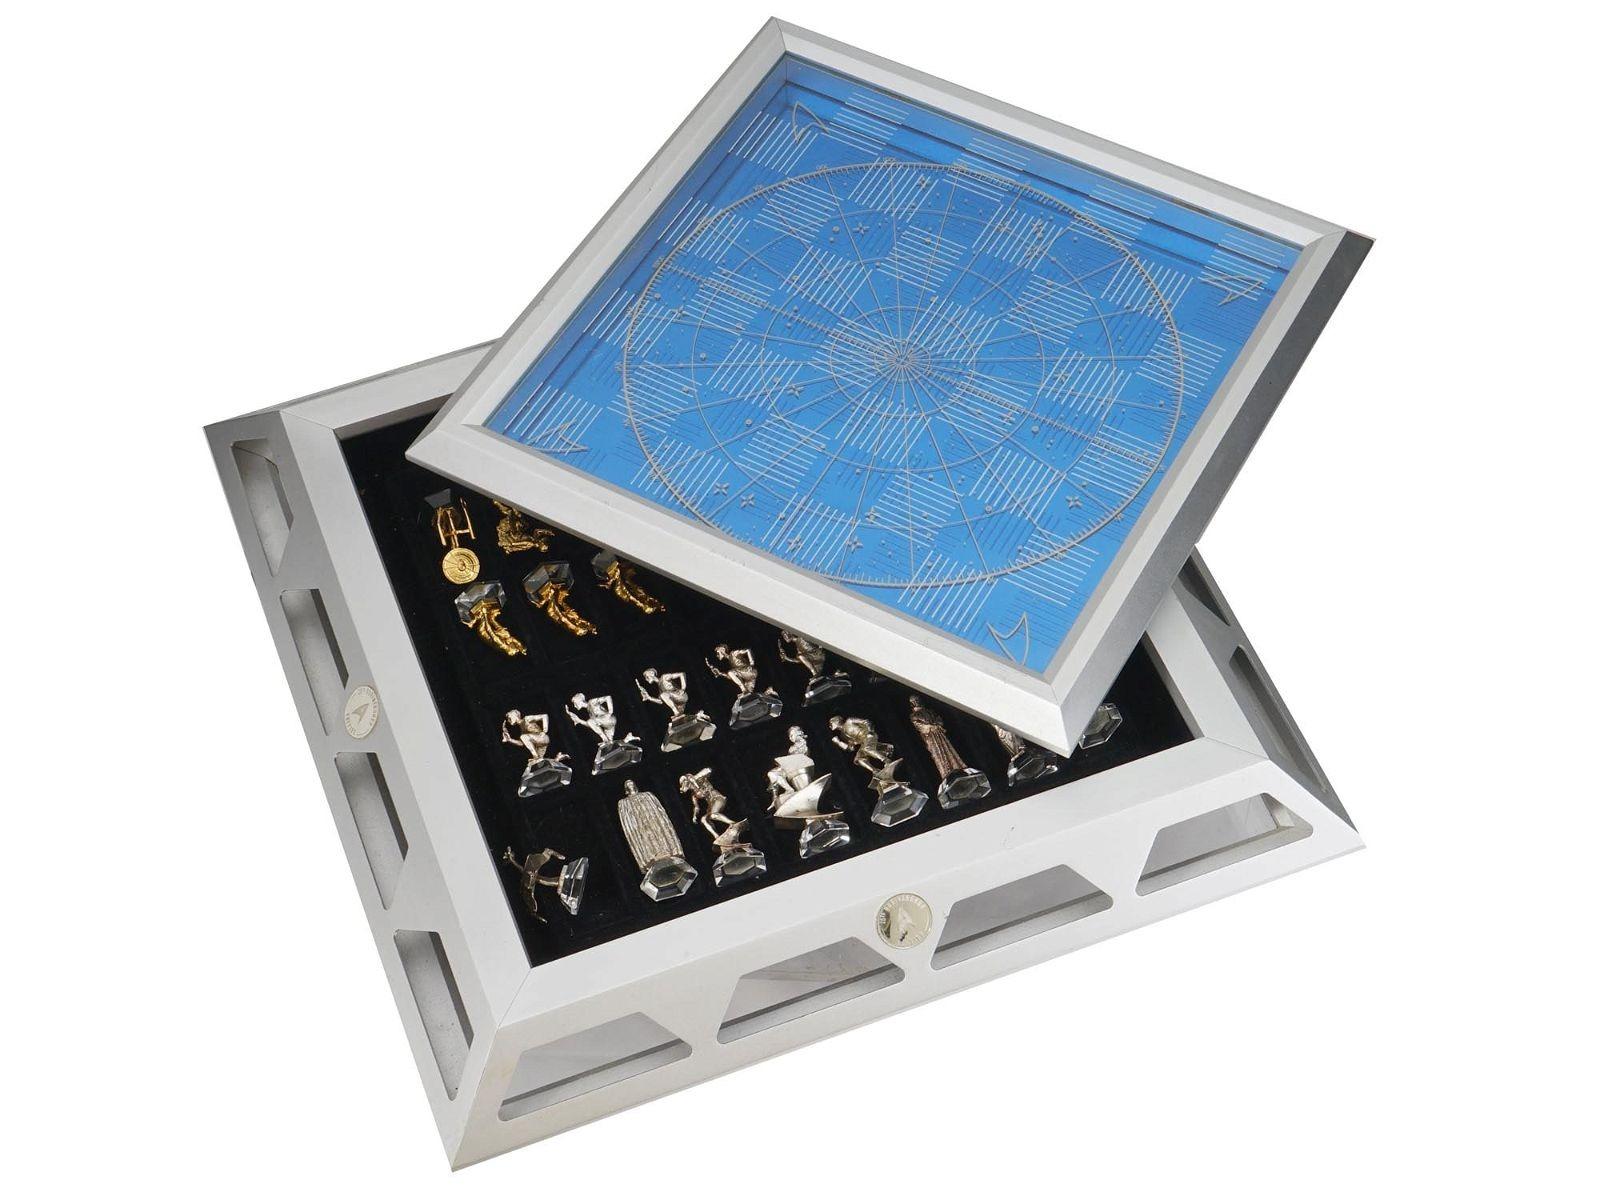 Commemorative Star Trek chess set by Franklin Mint, 25th Anniversary Special Edition, with finely crafted gold and sterling silver plated Klingon and Federation chess pieces raised on crystal bases. 